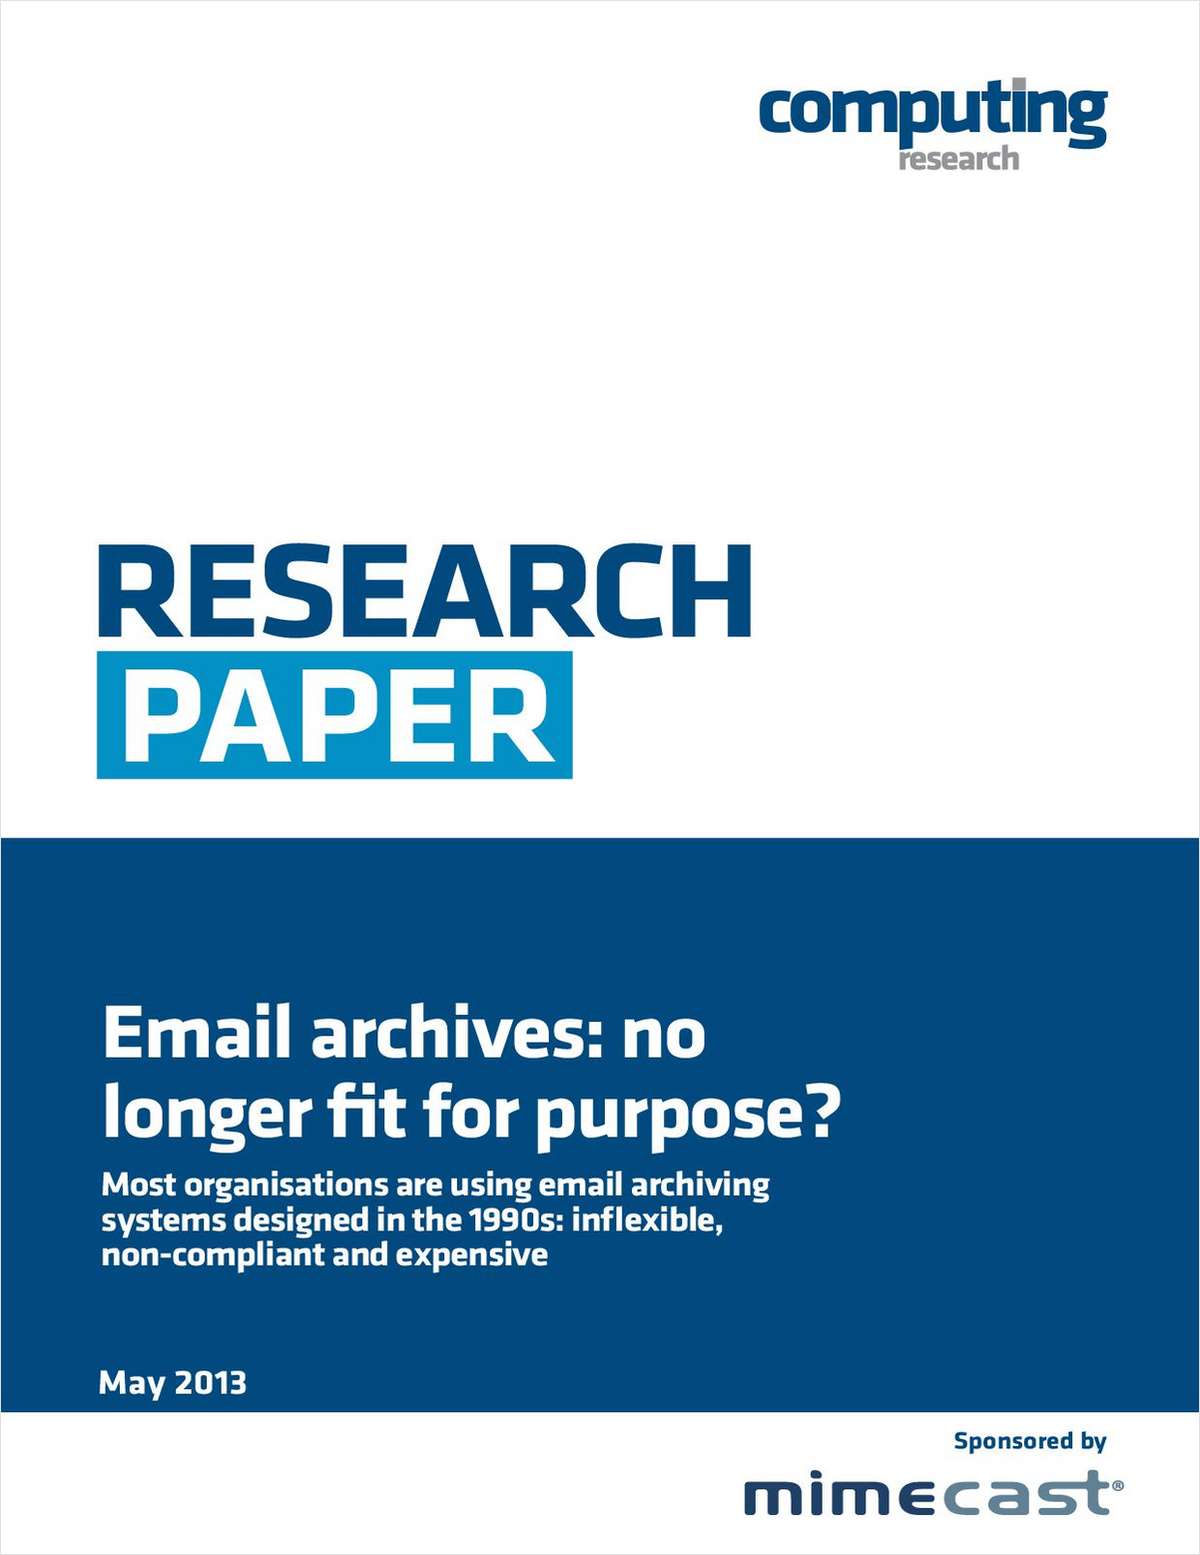 Email Archives: No Longer Fit for Purpose?